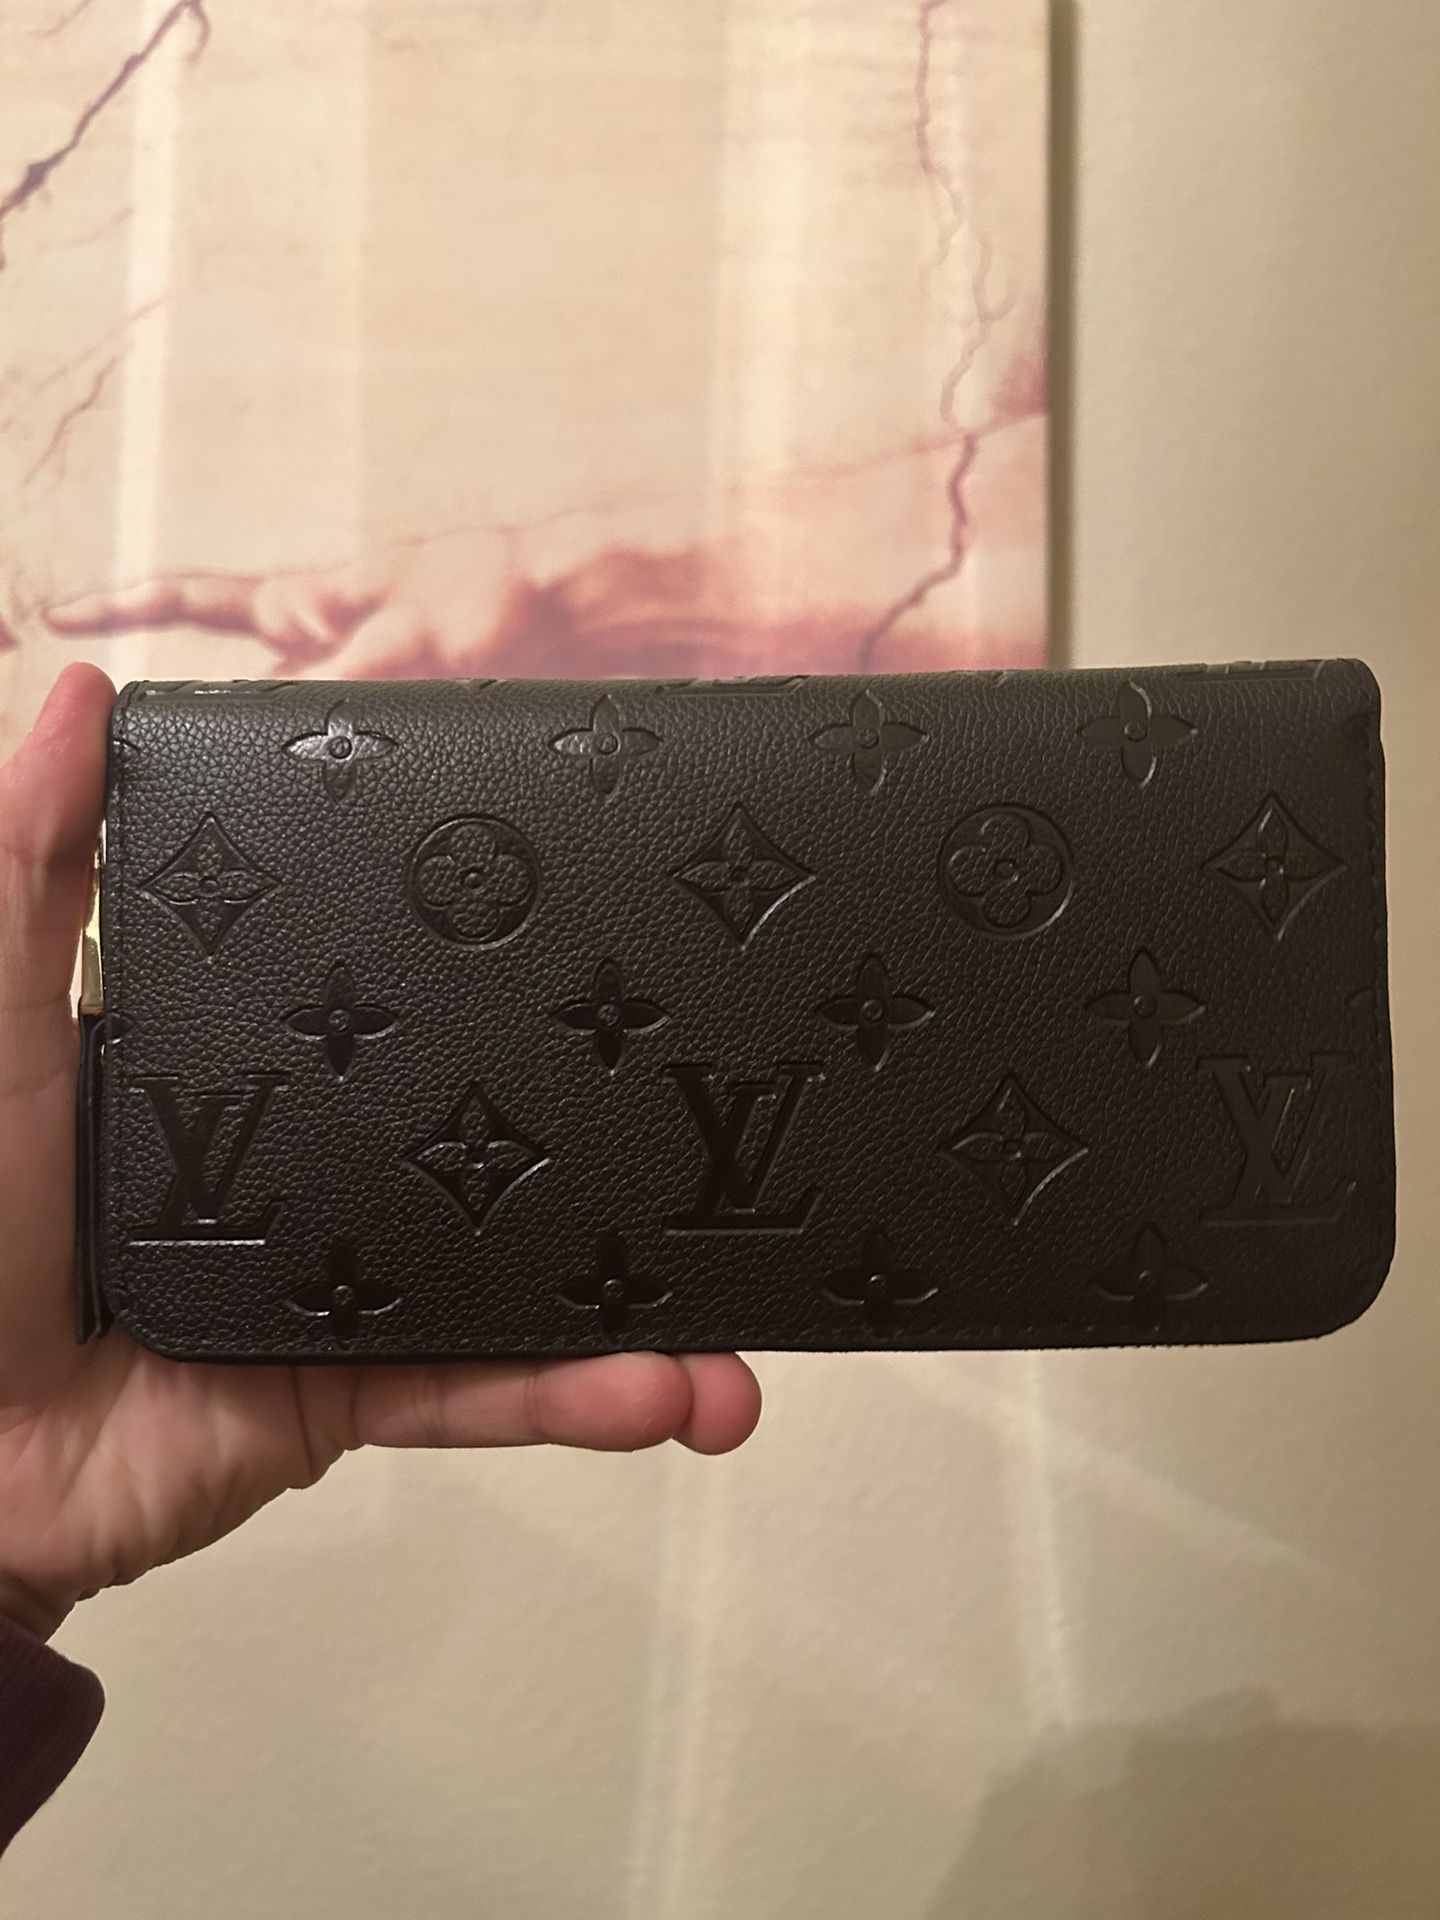 Women Used Louis Vuitton Wallet In Excellent Condition $225 for Sale in  Baltimore, MD - OfferUp